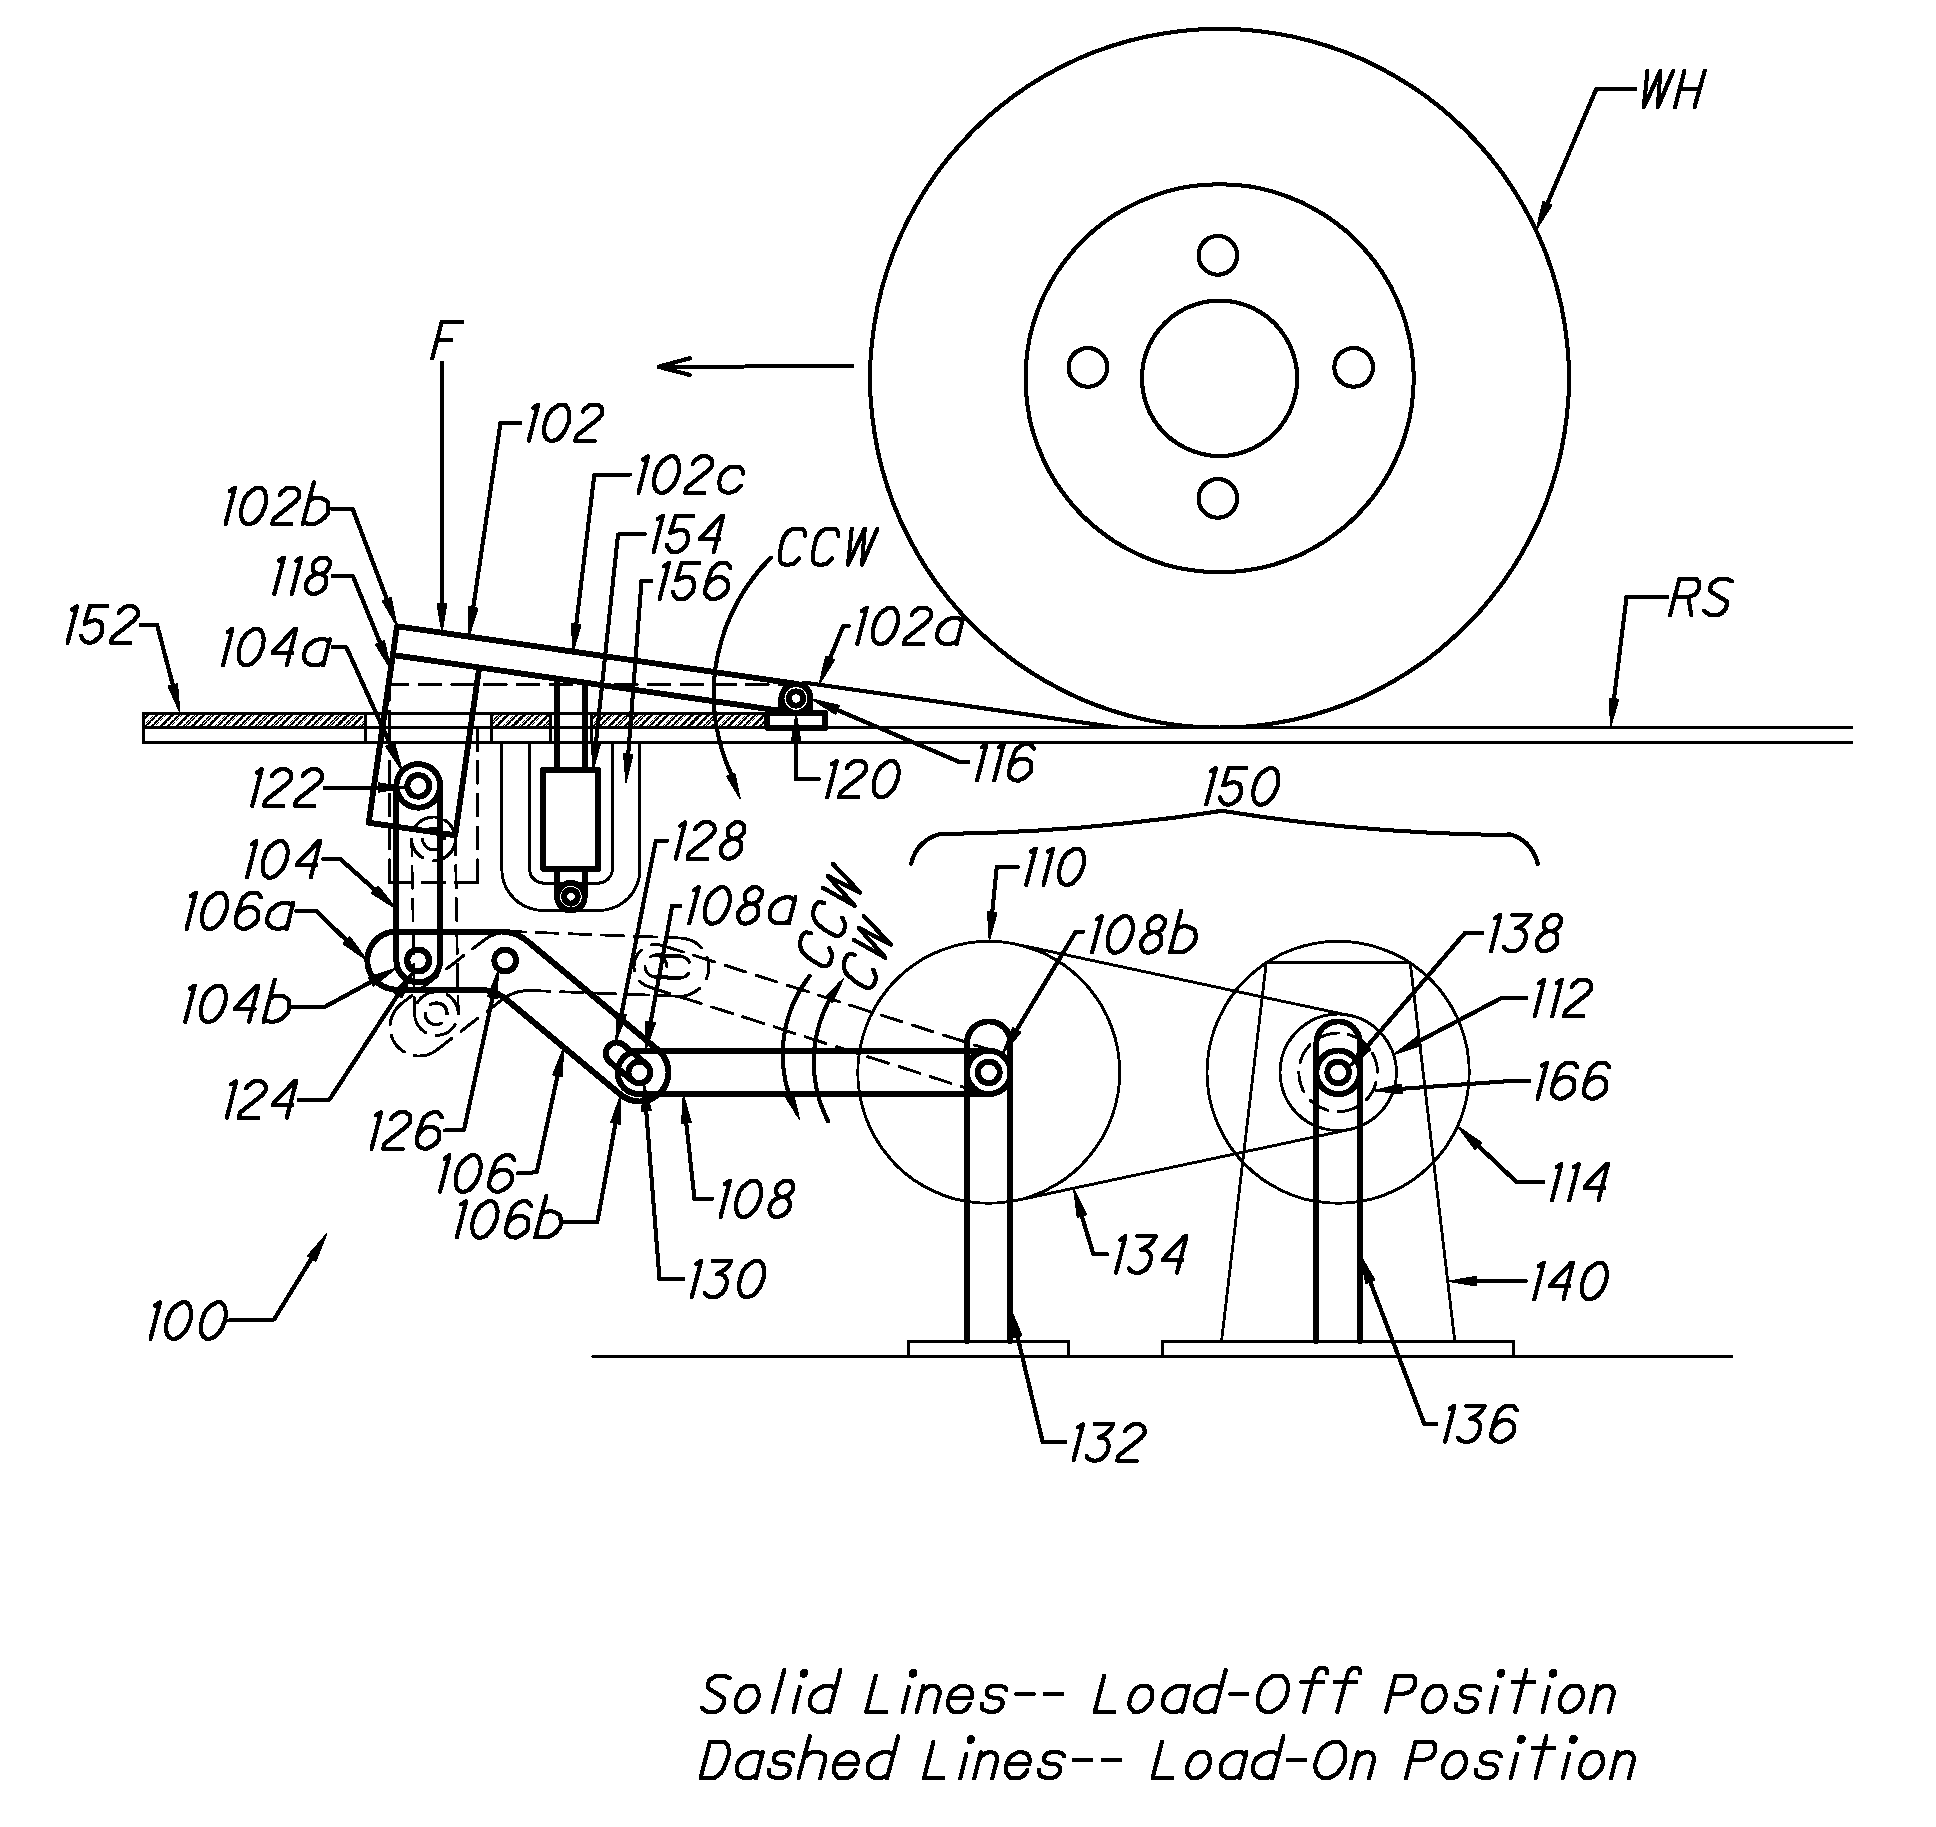 Electrical Generator Apparatus, Particularly For Use On a Vehicle Roadway